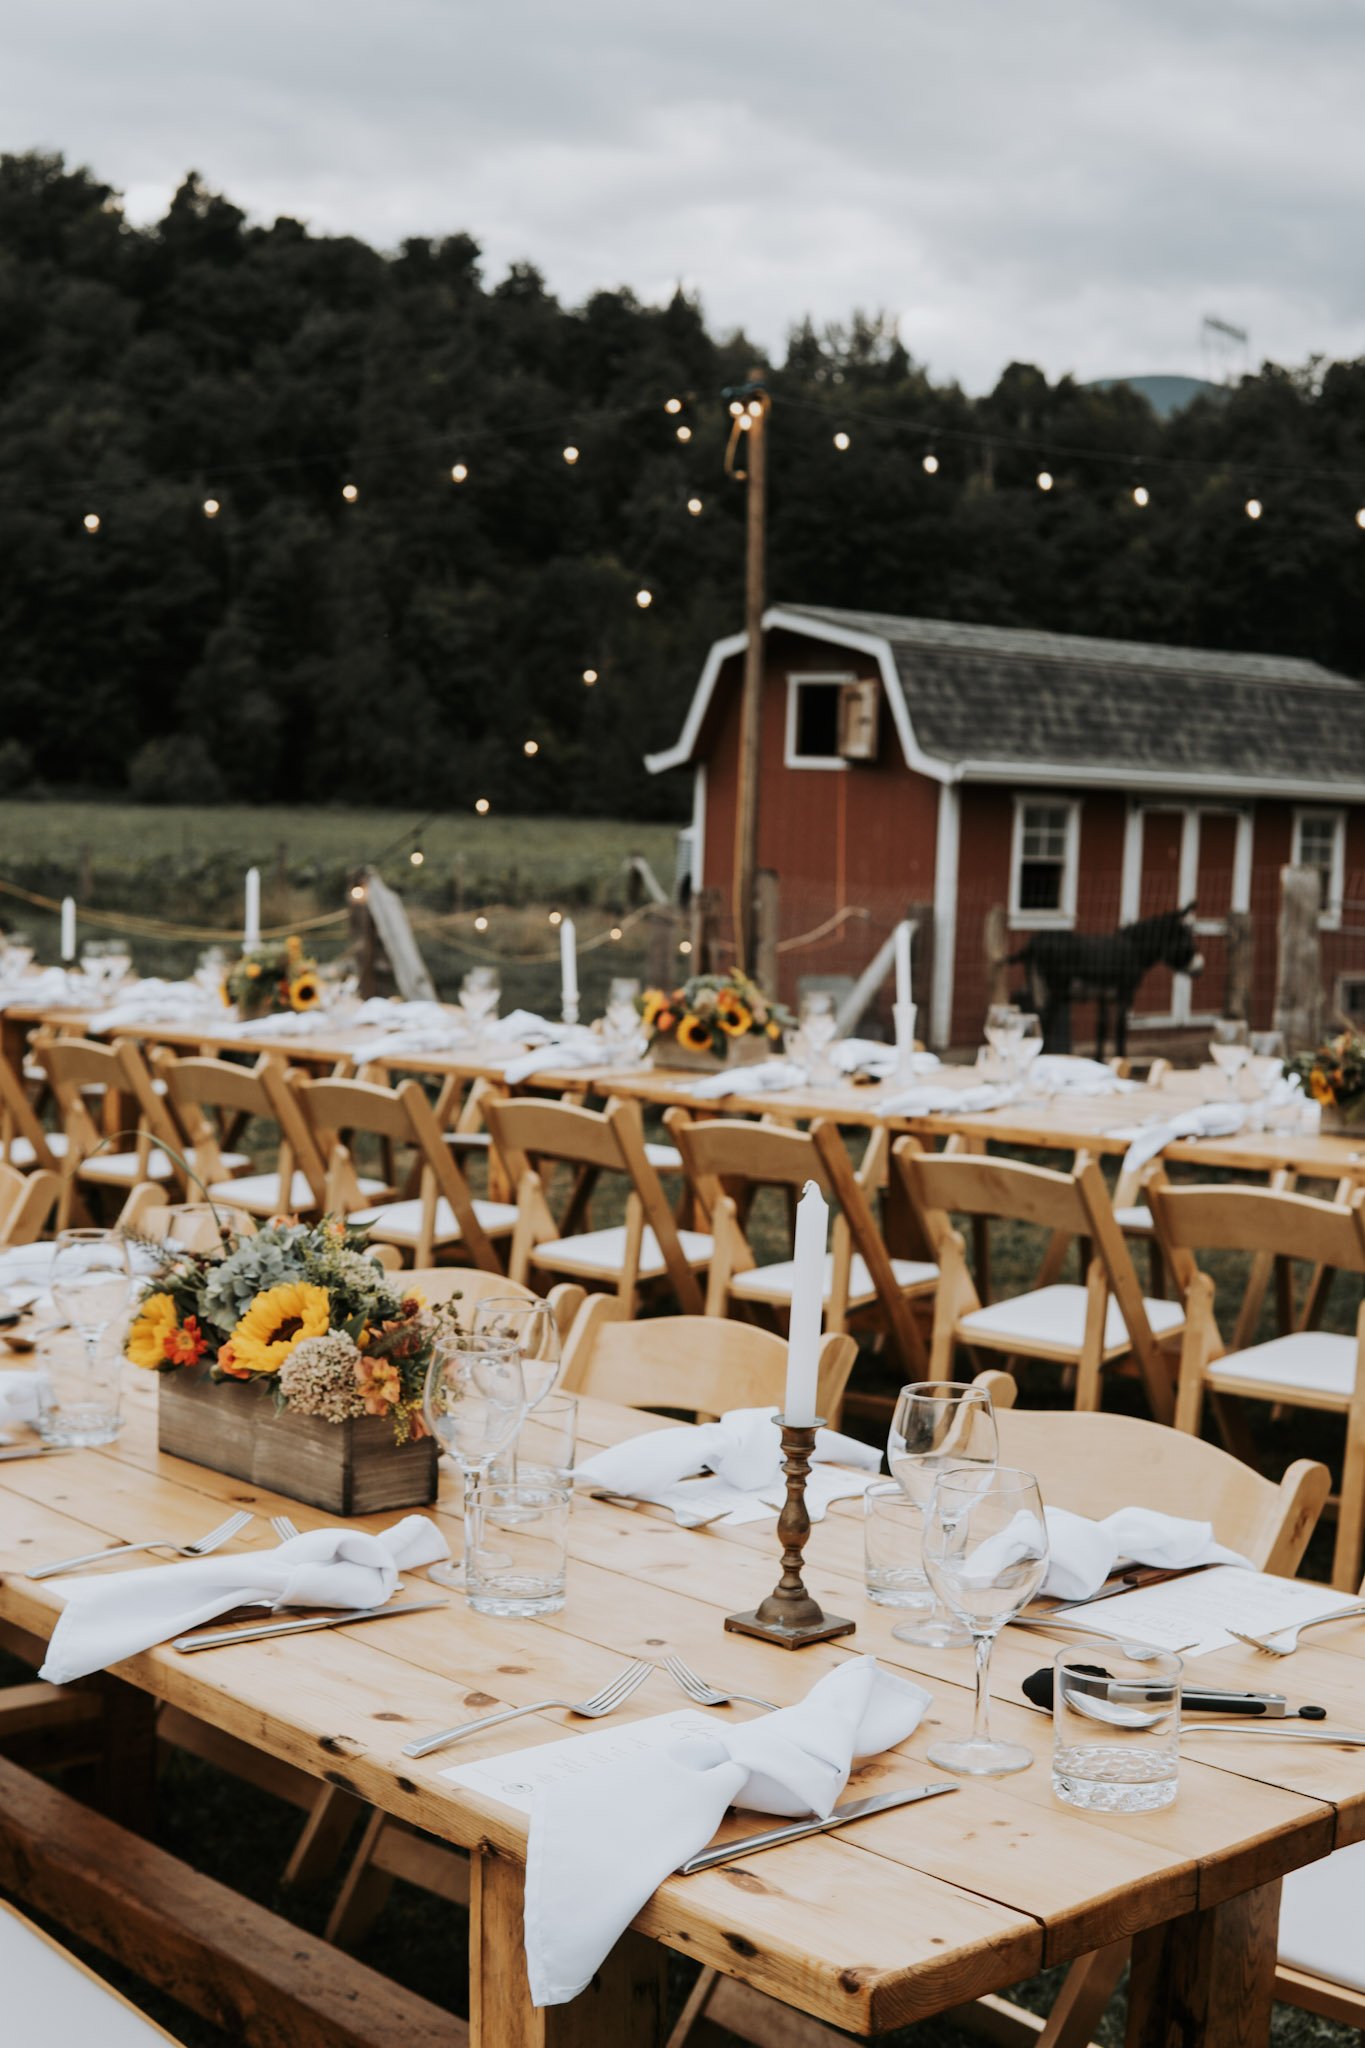   Our very first long table dinner took place this August. It was a dreamy, magical evening of fine dining and good conversation under the stars. Tickets for 2024’s dinner are on sale now on our website. We can’t wait to see what Chef Craig Scherer h